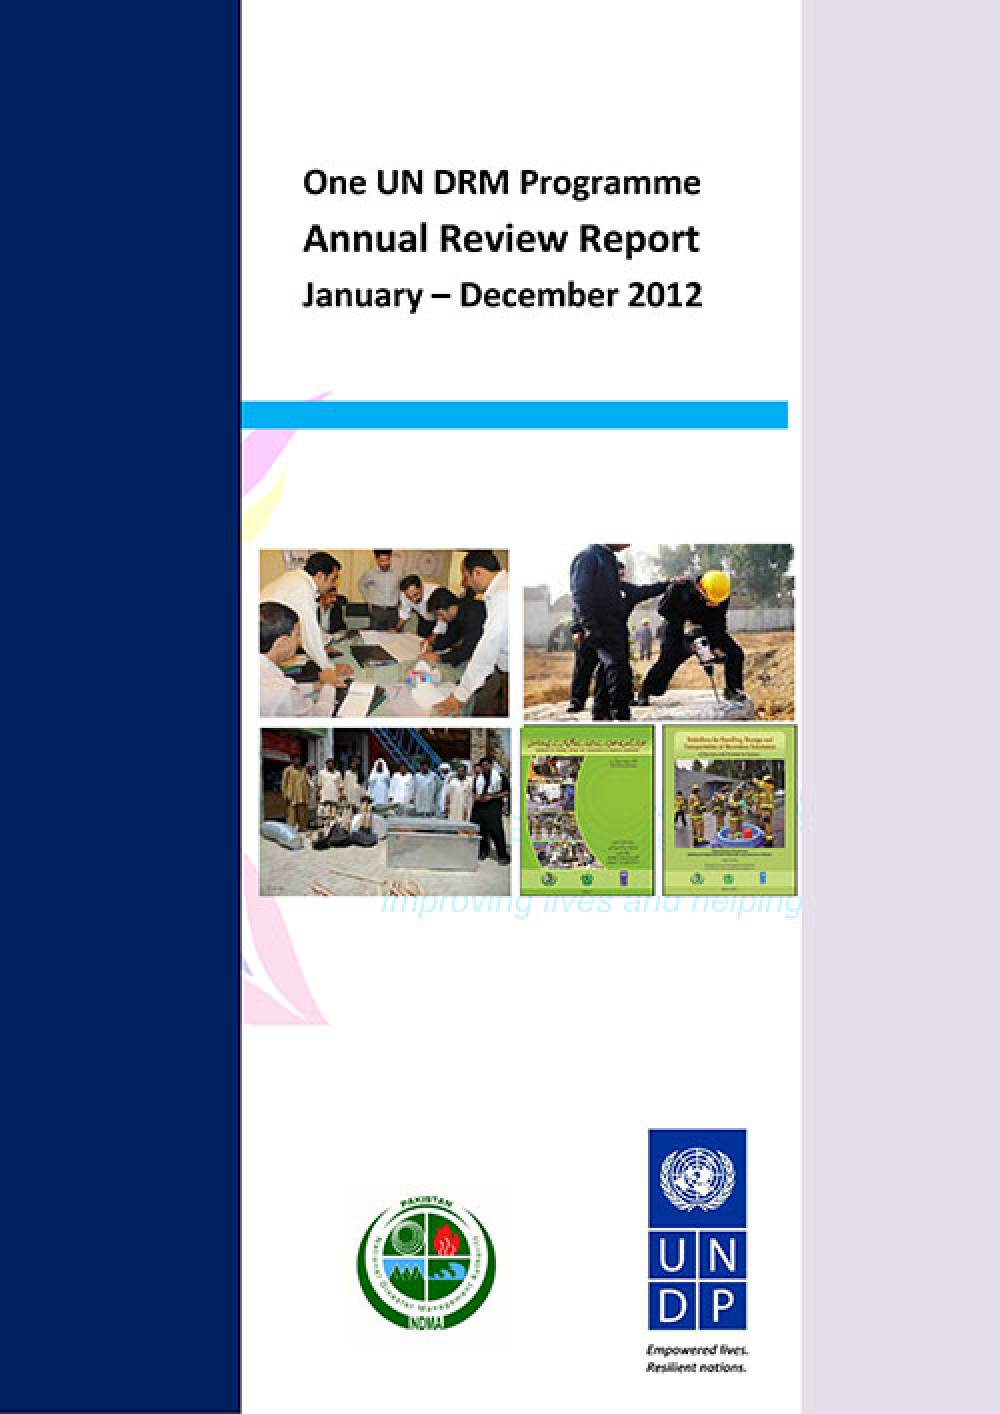 Annual Review Report-One UN DRM Programme 2012